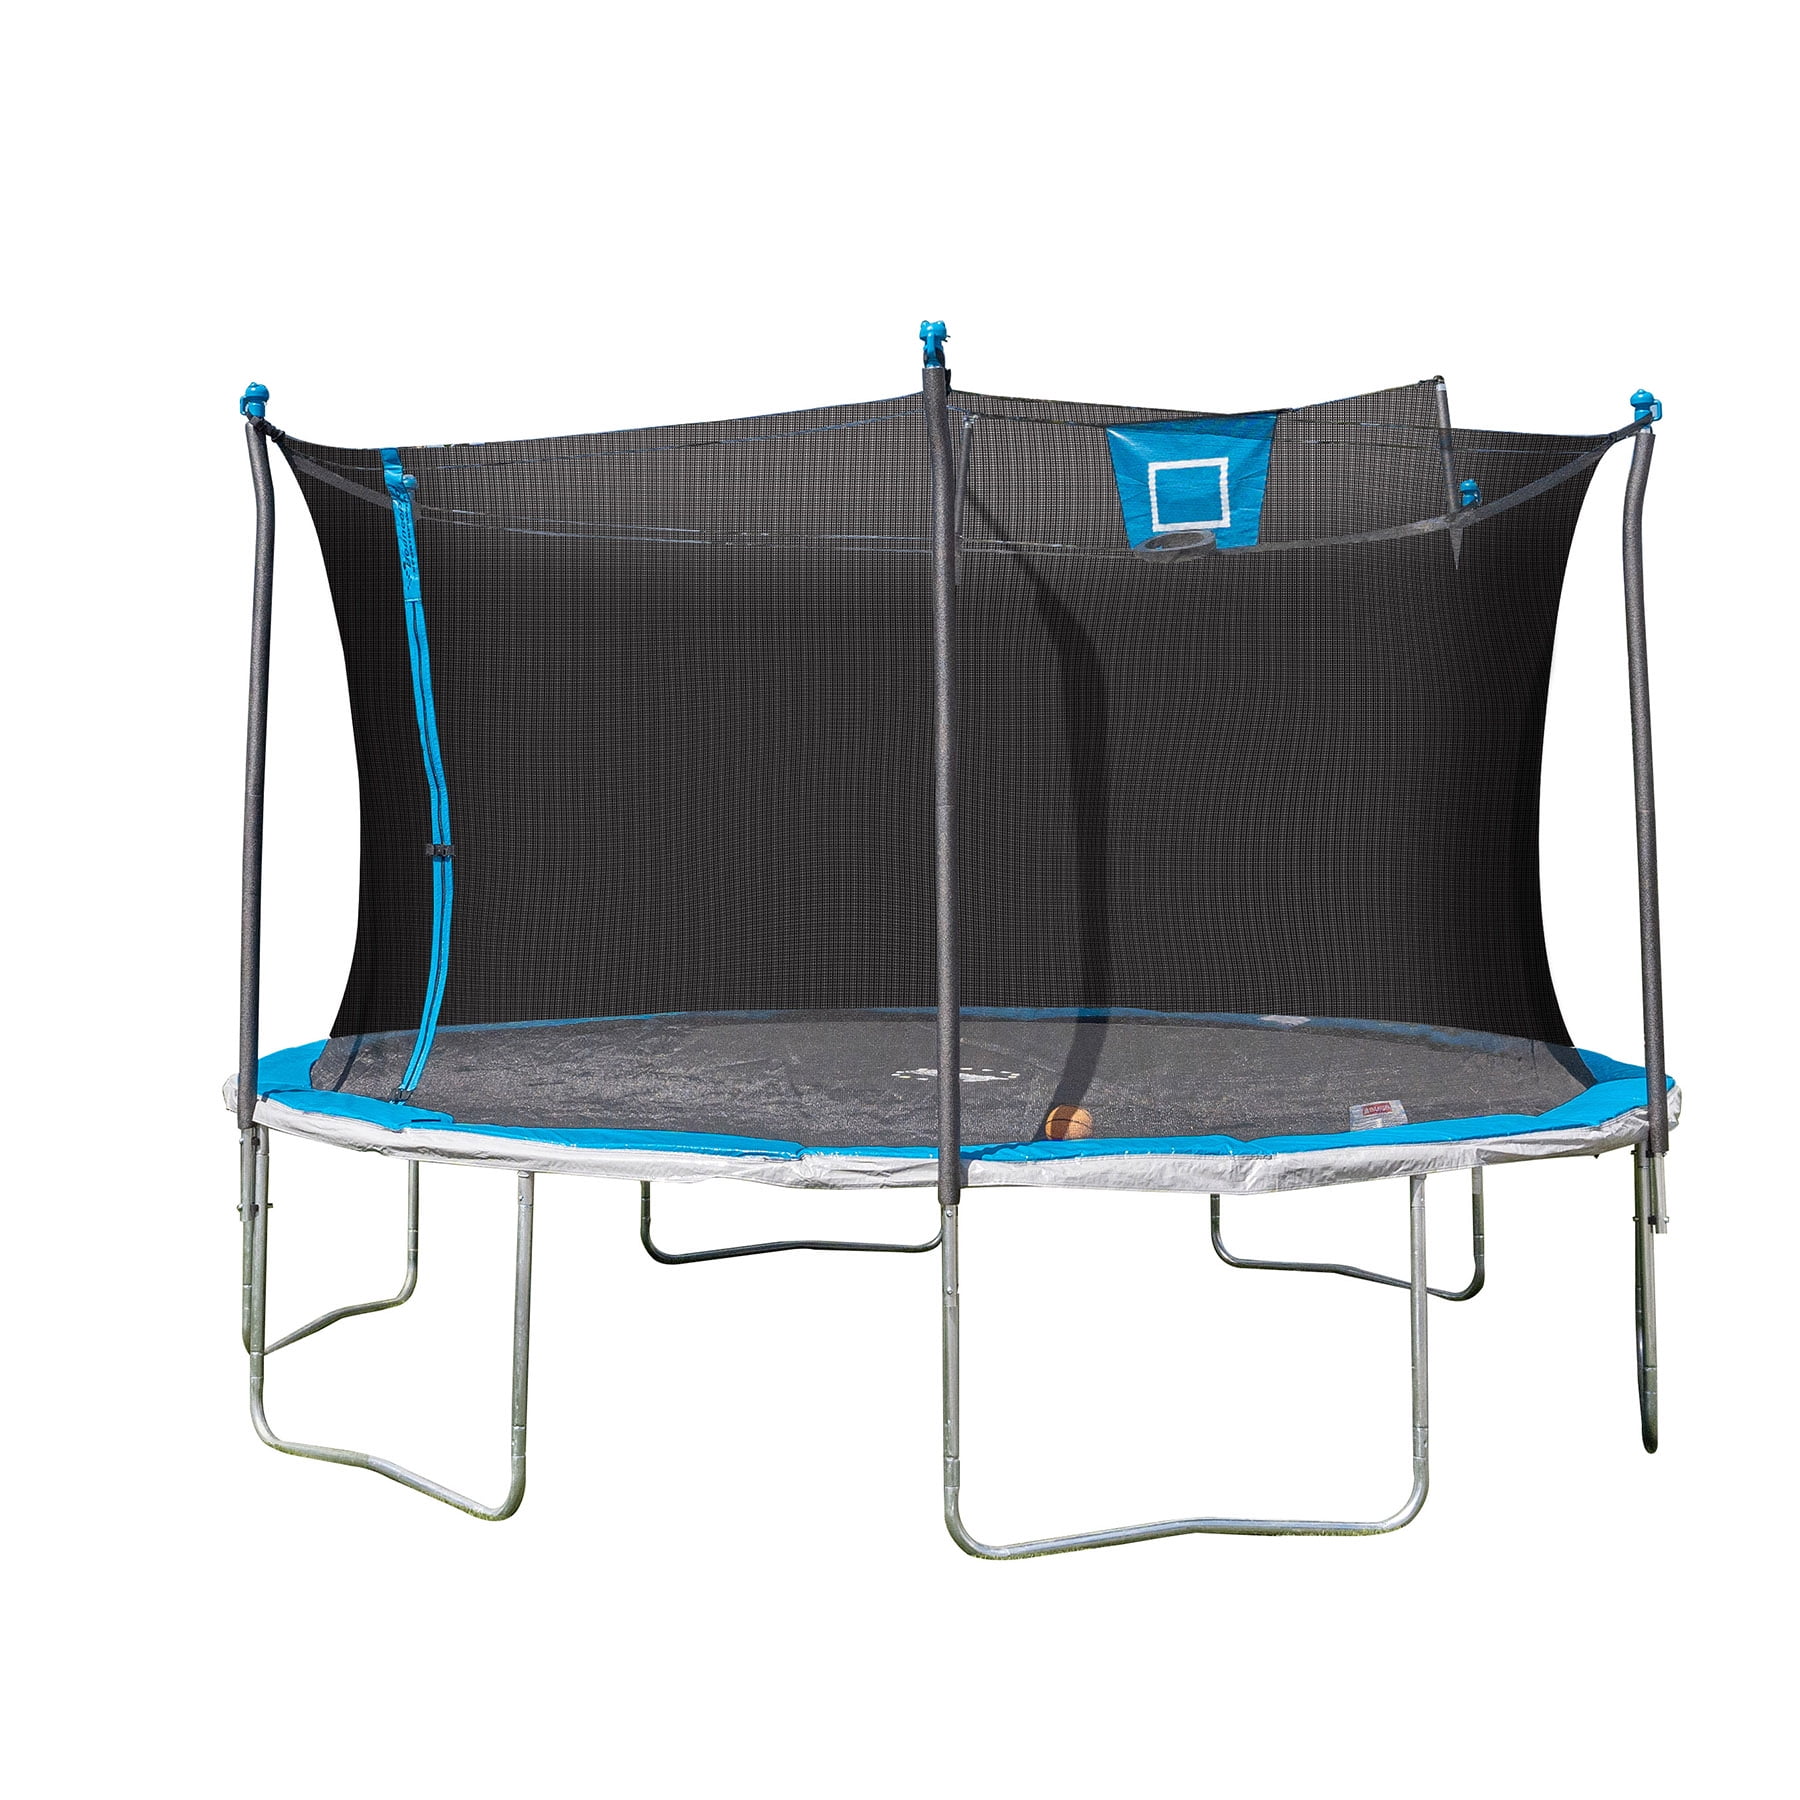 Bounce Pro 14ft Trampoline With Basketball Hoop, Blue -